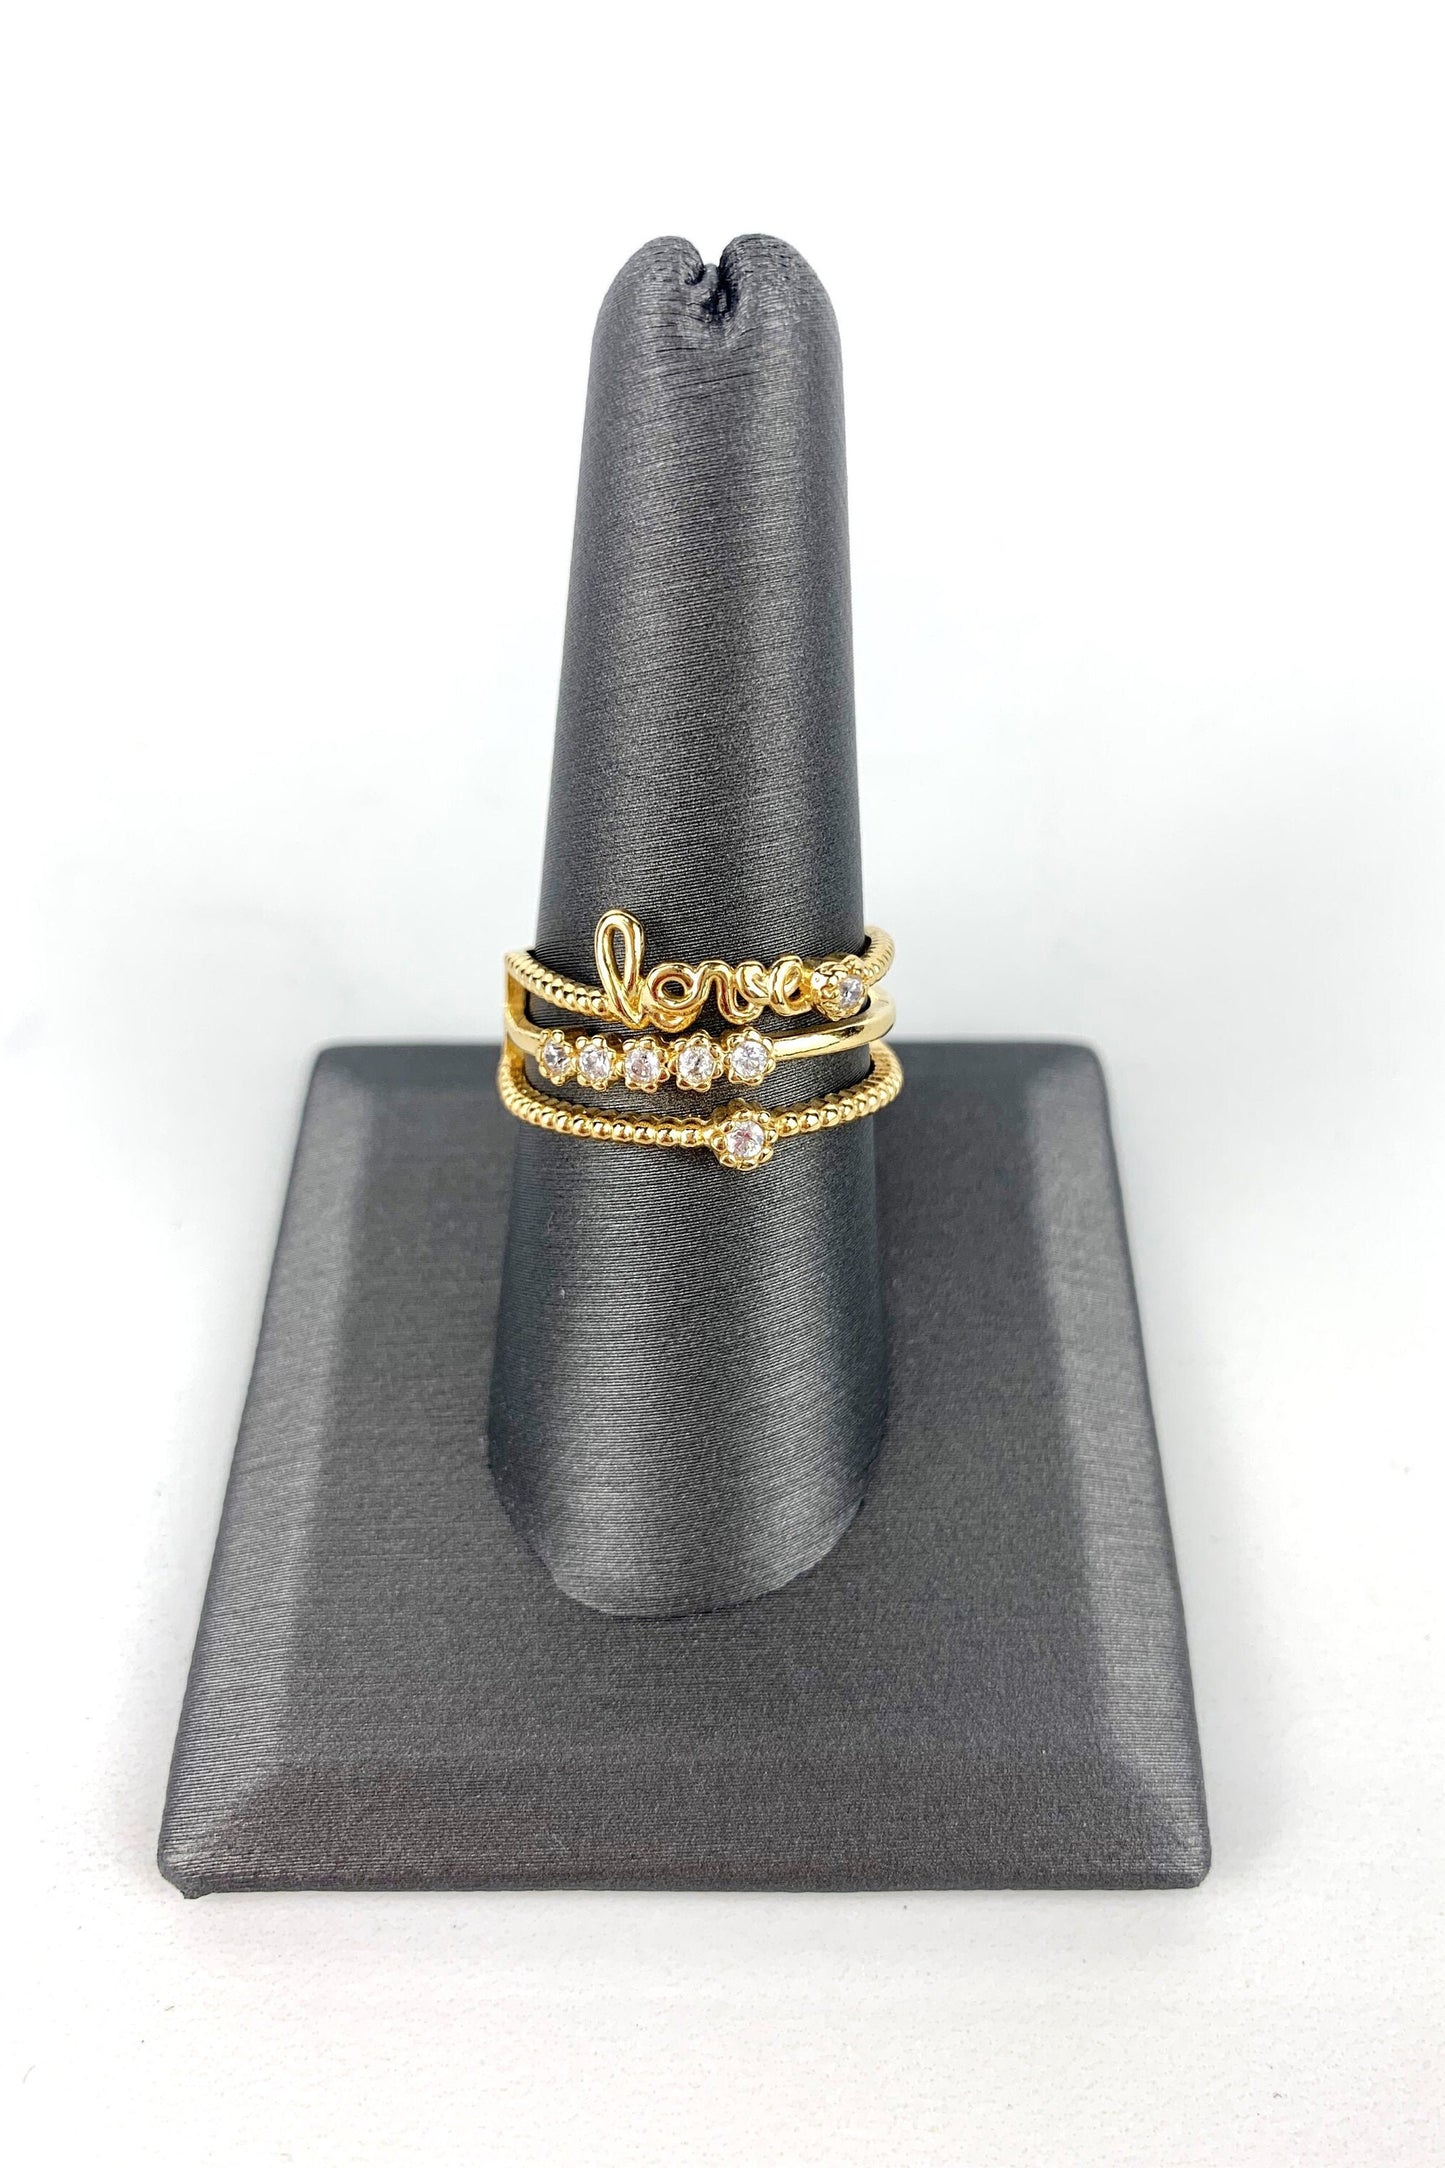 18k Gold Filled "Love" Simulated Stacking Ring Featuring Detail Micro Zirconia Wholesale Jewelry Supplies